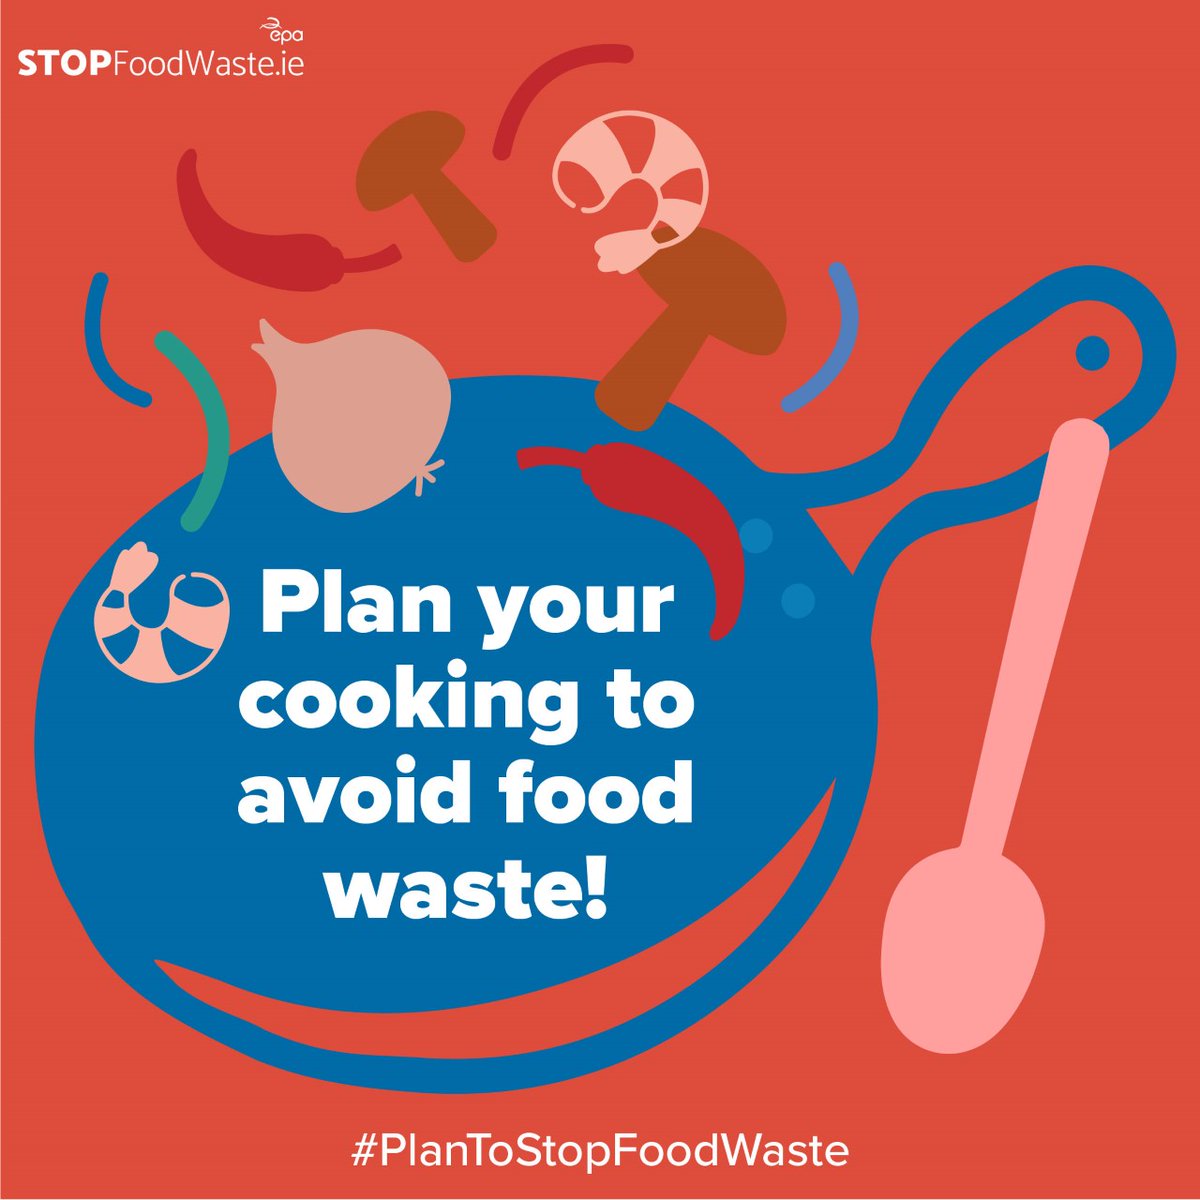 It can be tempting to reach for the phone to order food, but adhering to the food quanitities in the many lovely recipes found out there can really help us enjoy our home cooked meals, and #PlanToStopFoodWaste
@Stop_Food_Waste